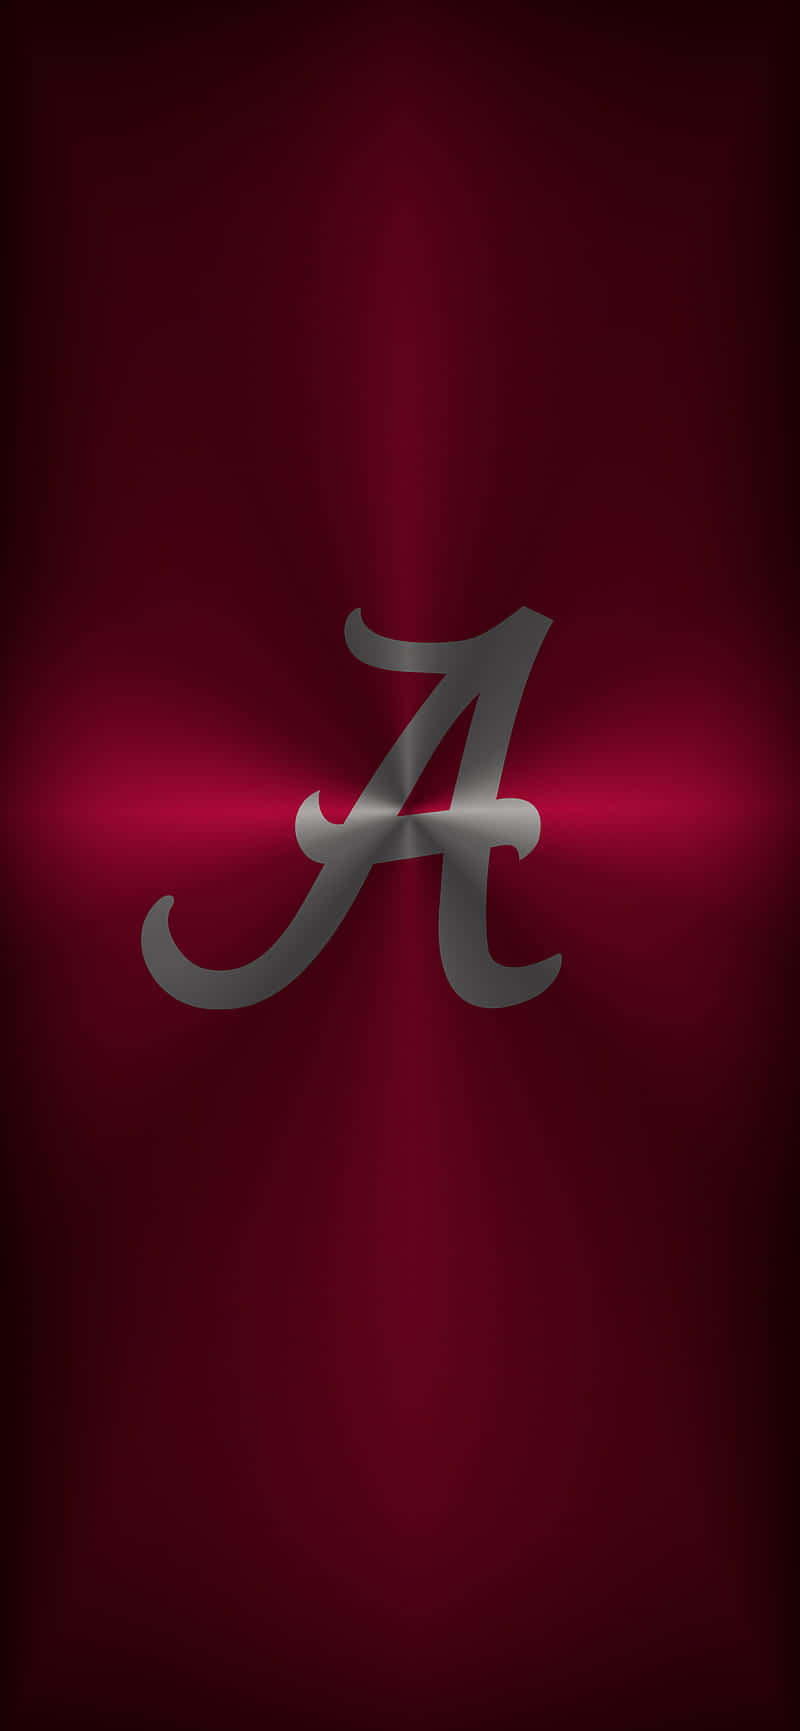 Get Ready for Alabama Football with this iPhone Wallpaper